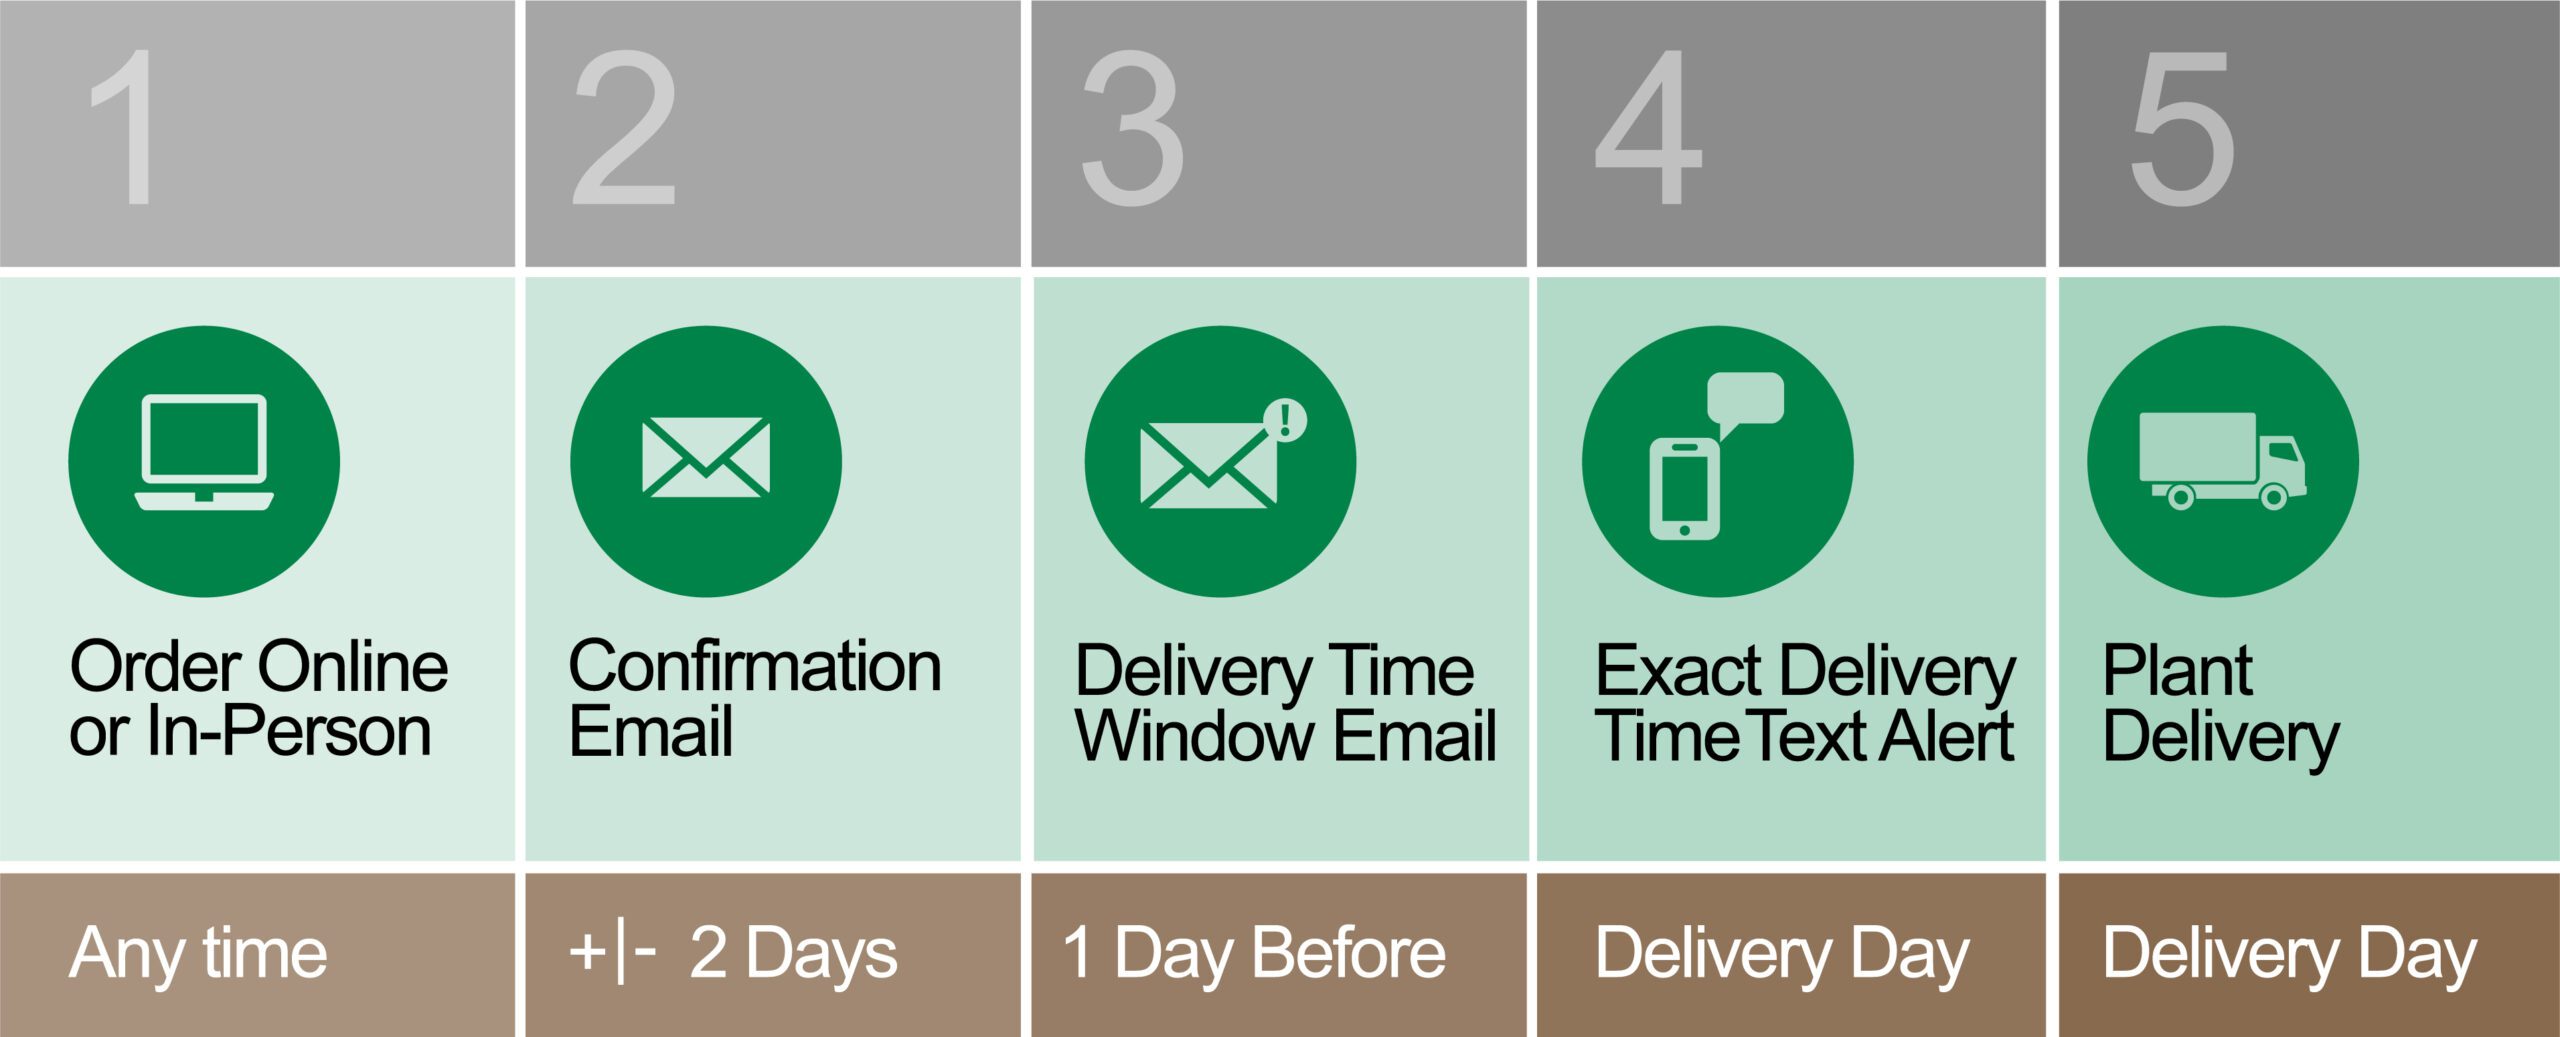 5 steps of PLANT Delivery Alert service | Pacific Nurseries